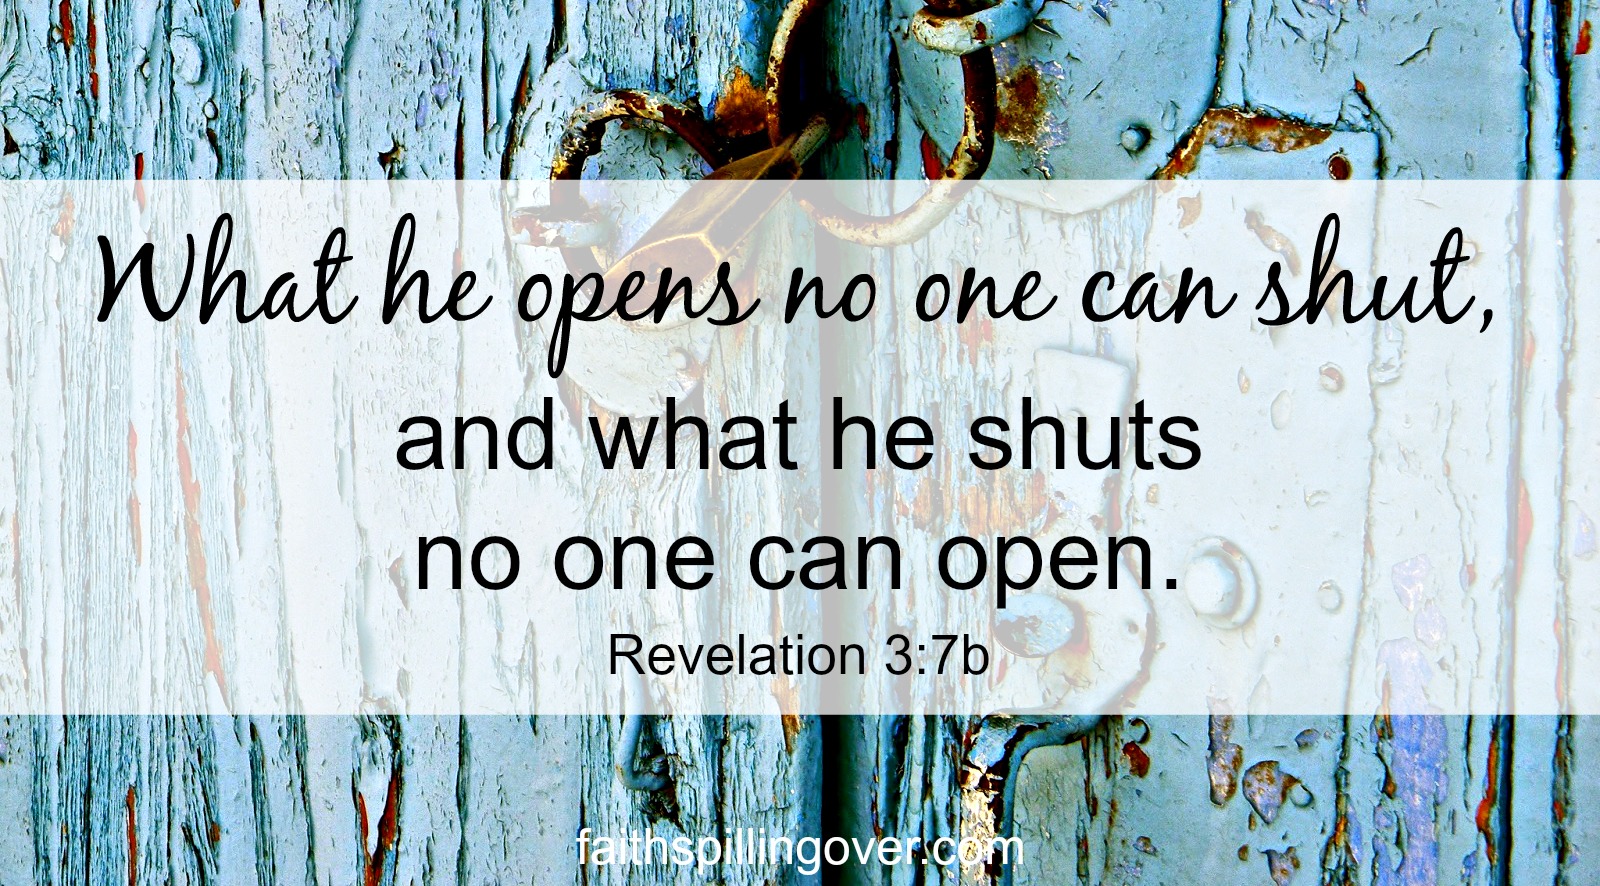 Closed doors disappoint us, but we can always trust God's leading.